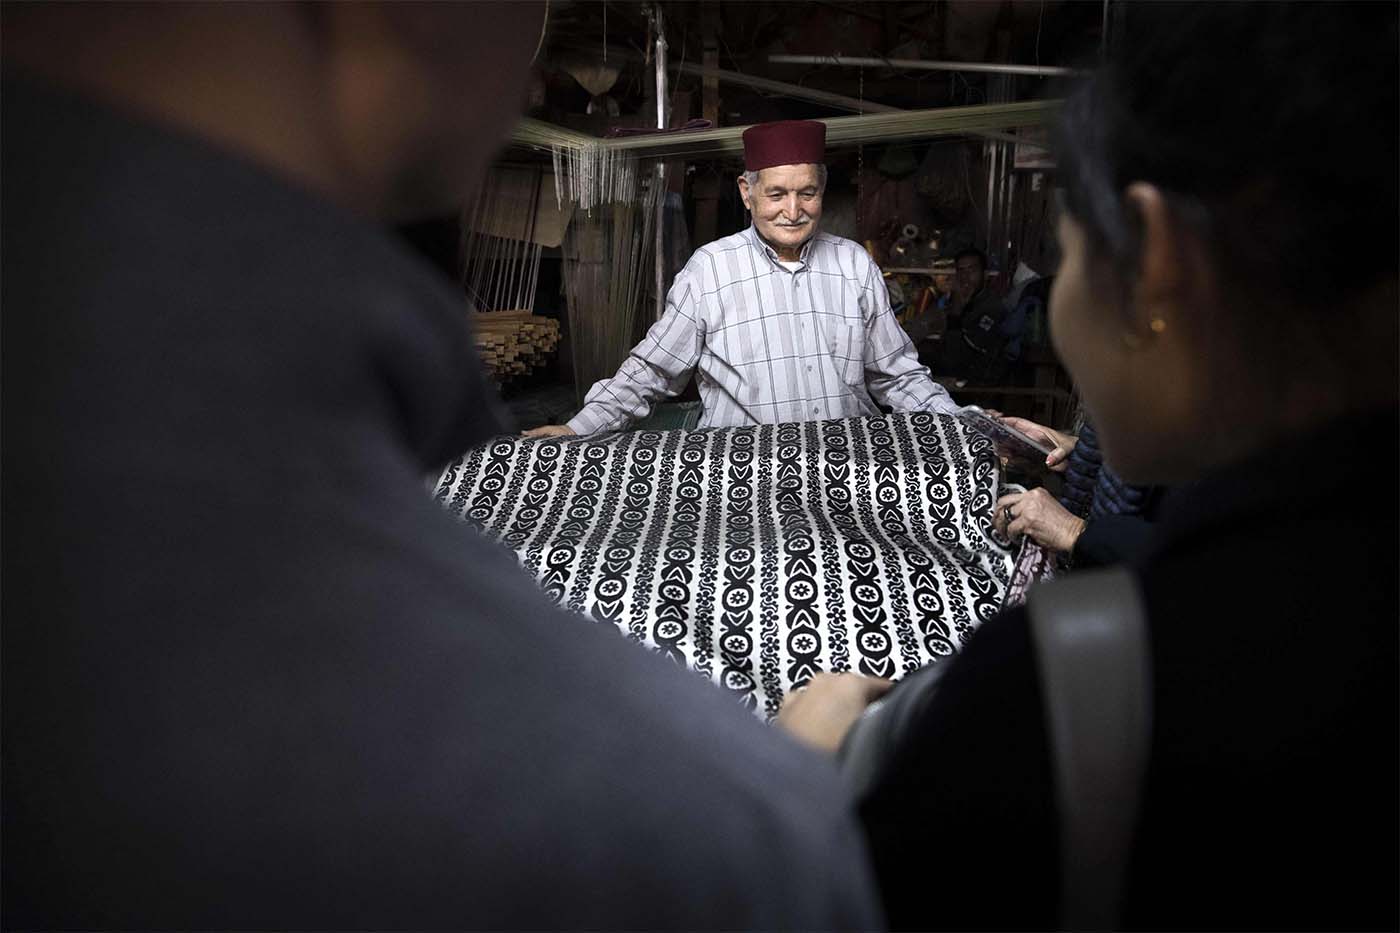 His rare fabrics cost up to 5,000 dirhams per metre, depending on the complexity of the patterns